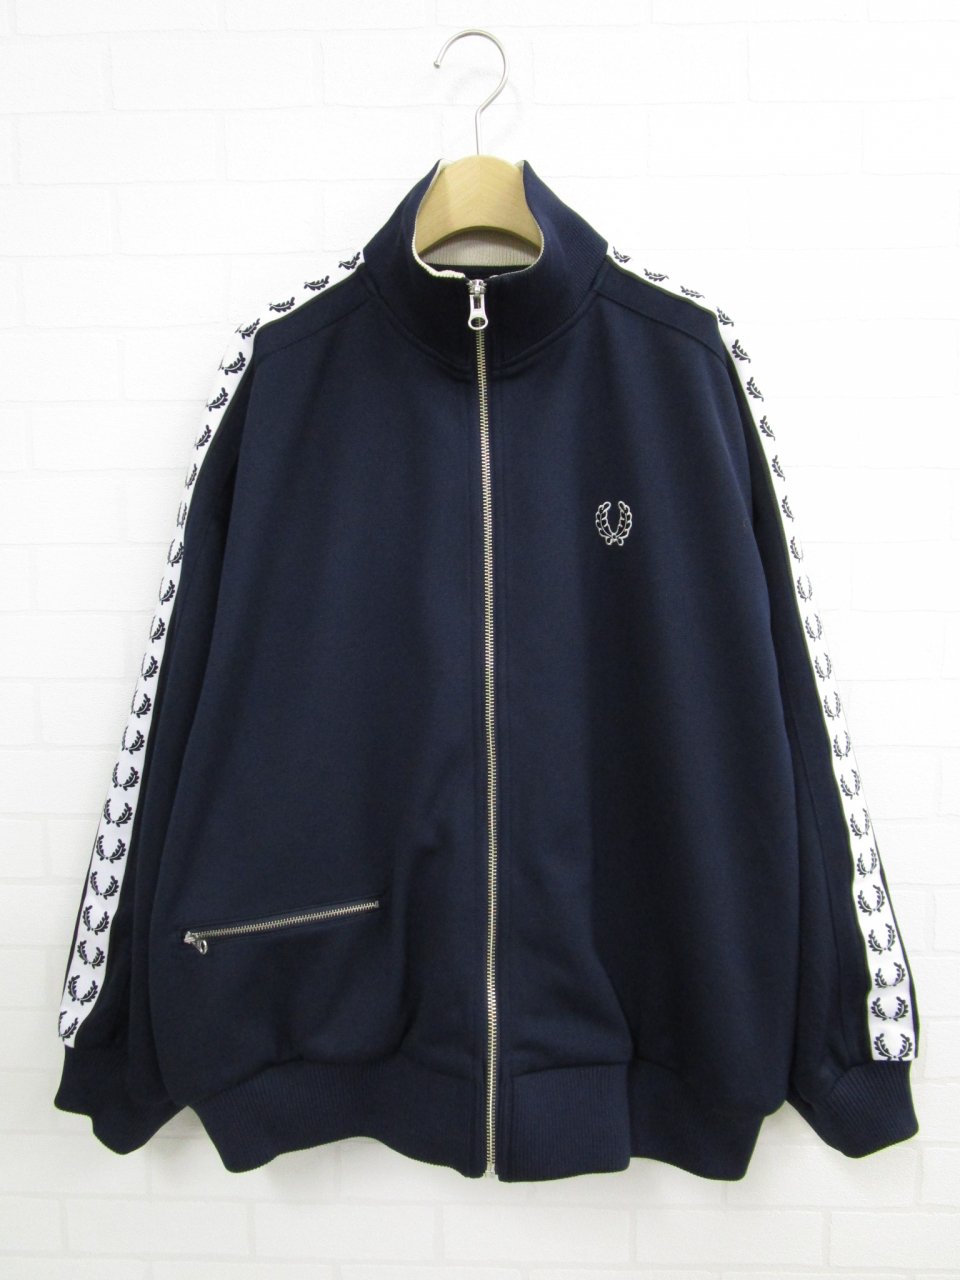 SALE FRED PERRY トラックジャケット